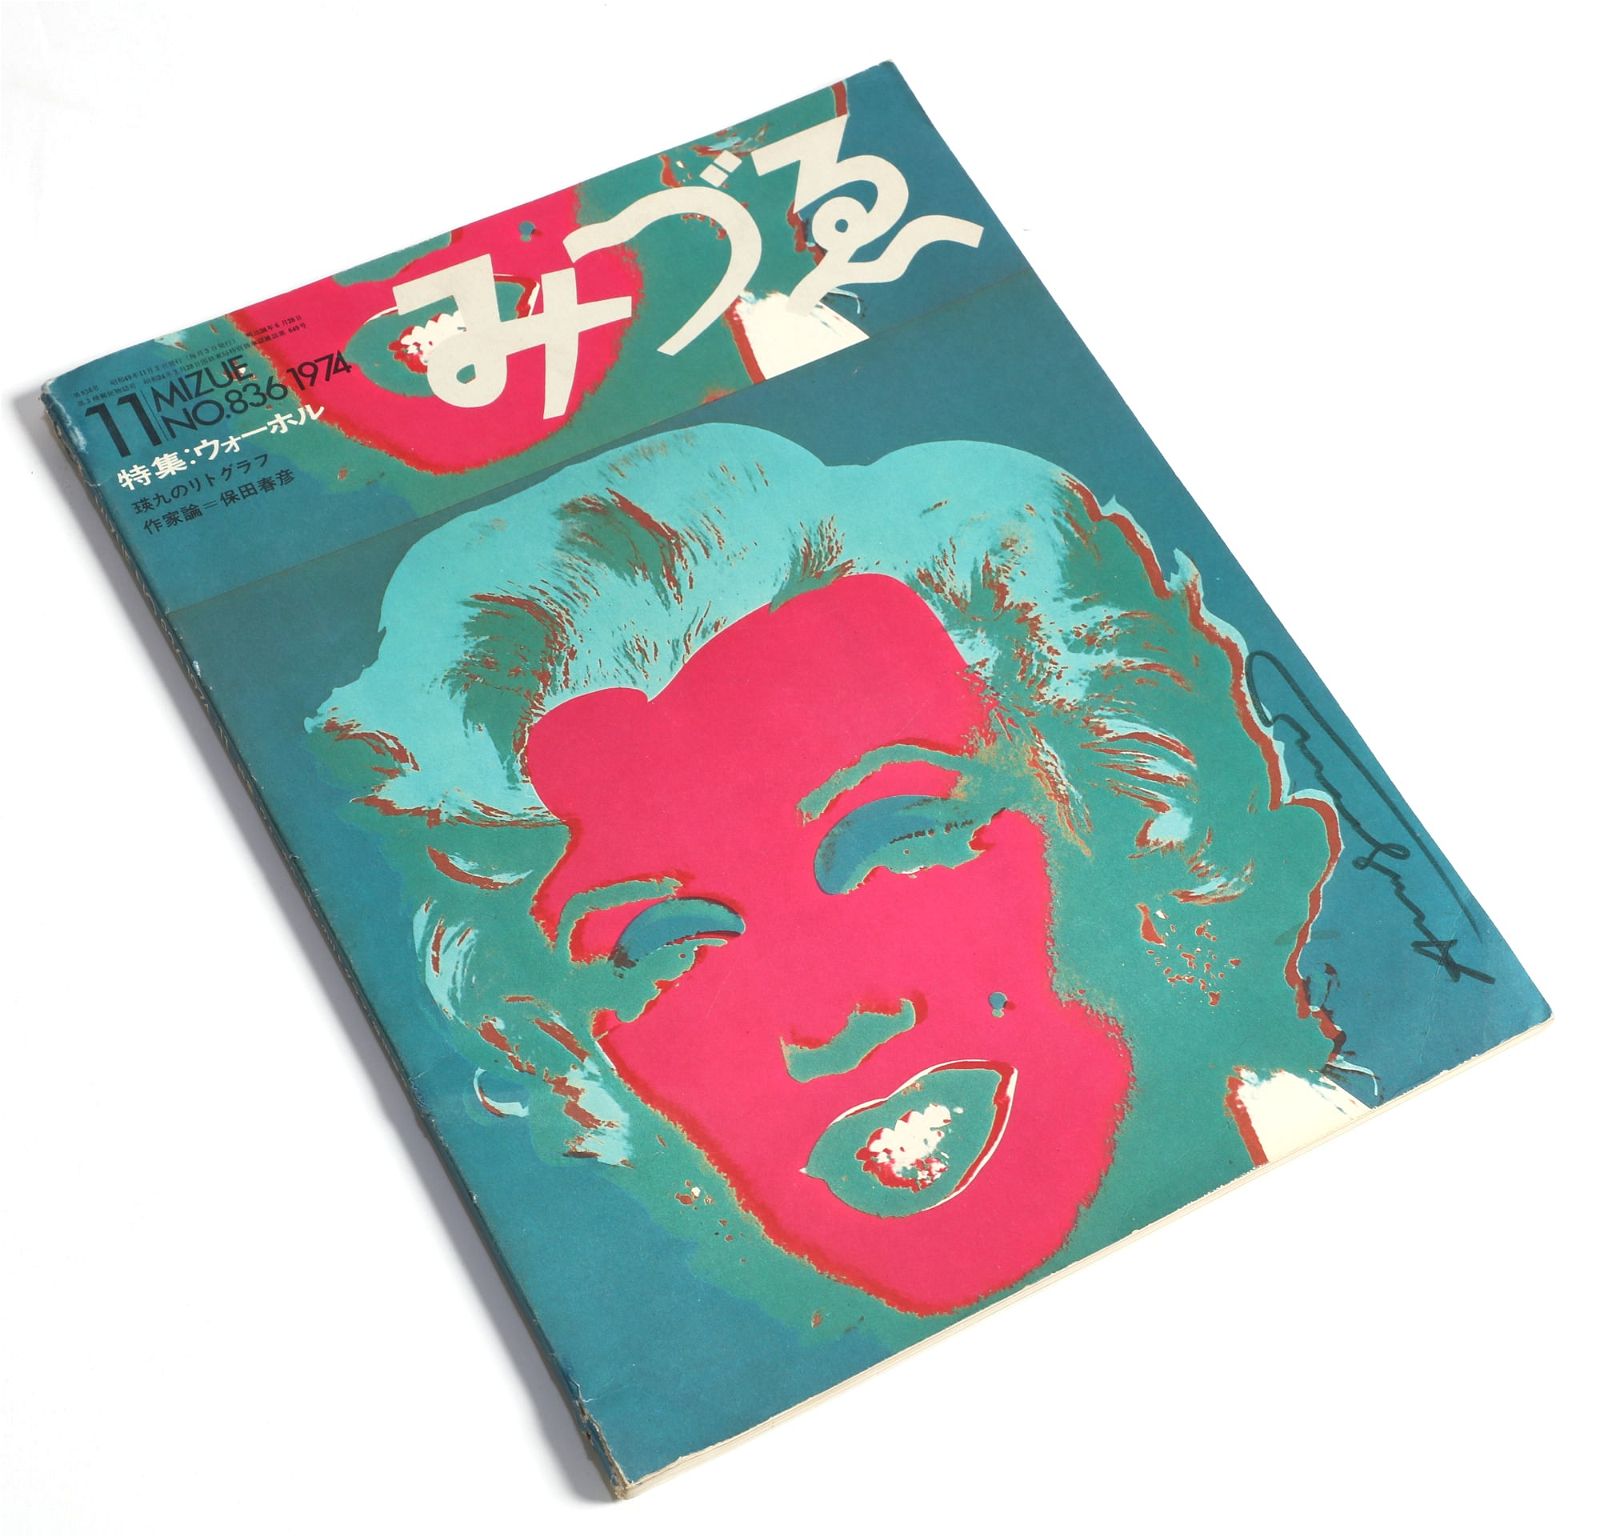 AN ANDY WARHOL SIGNED COPY OF MIZUEAn 2fb4212